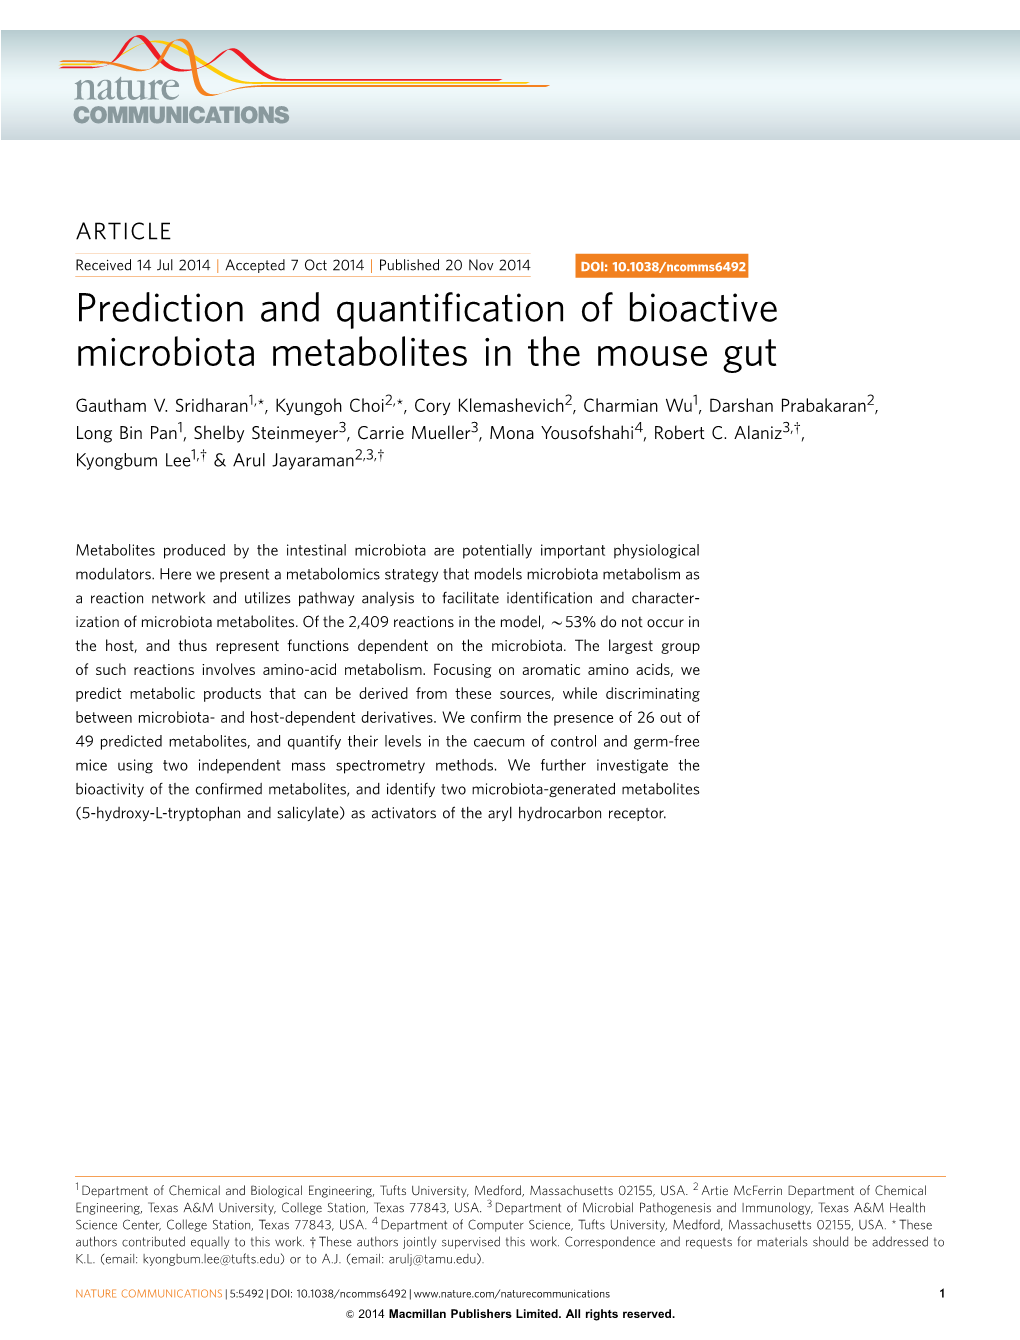 Prediction and Quantification of Bioactive Microbiota Metabolites in the Mouse